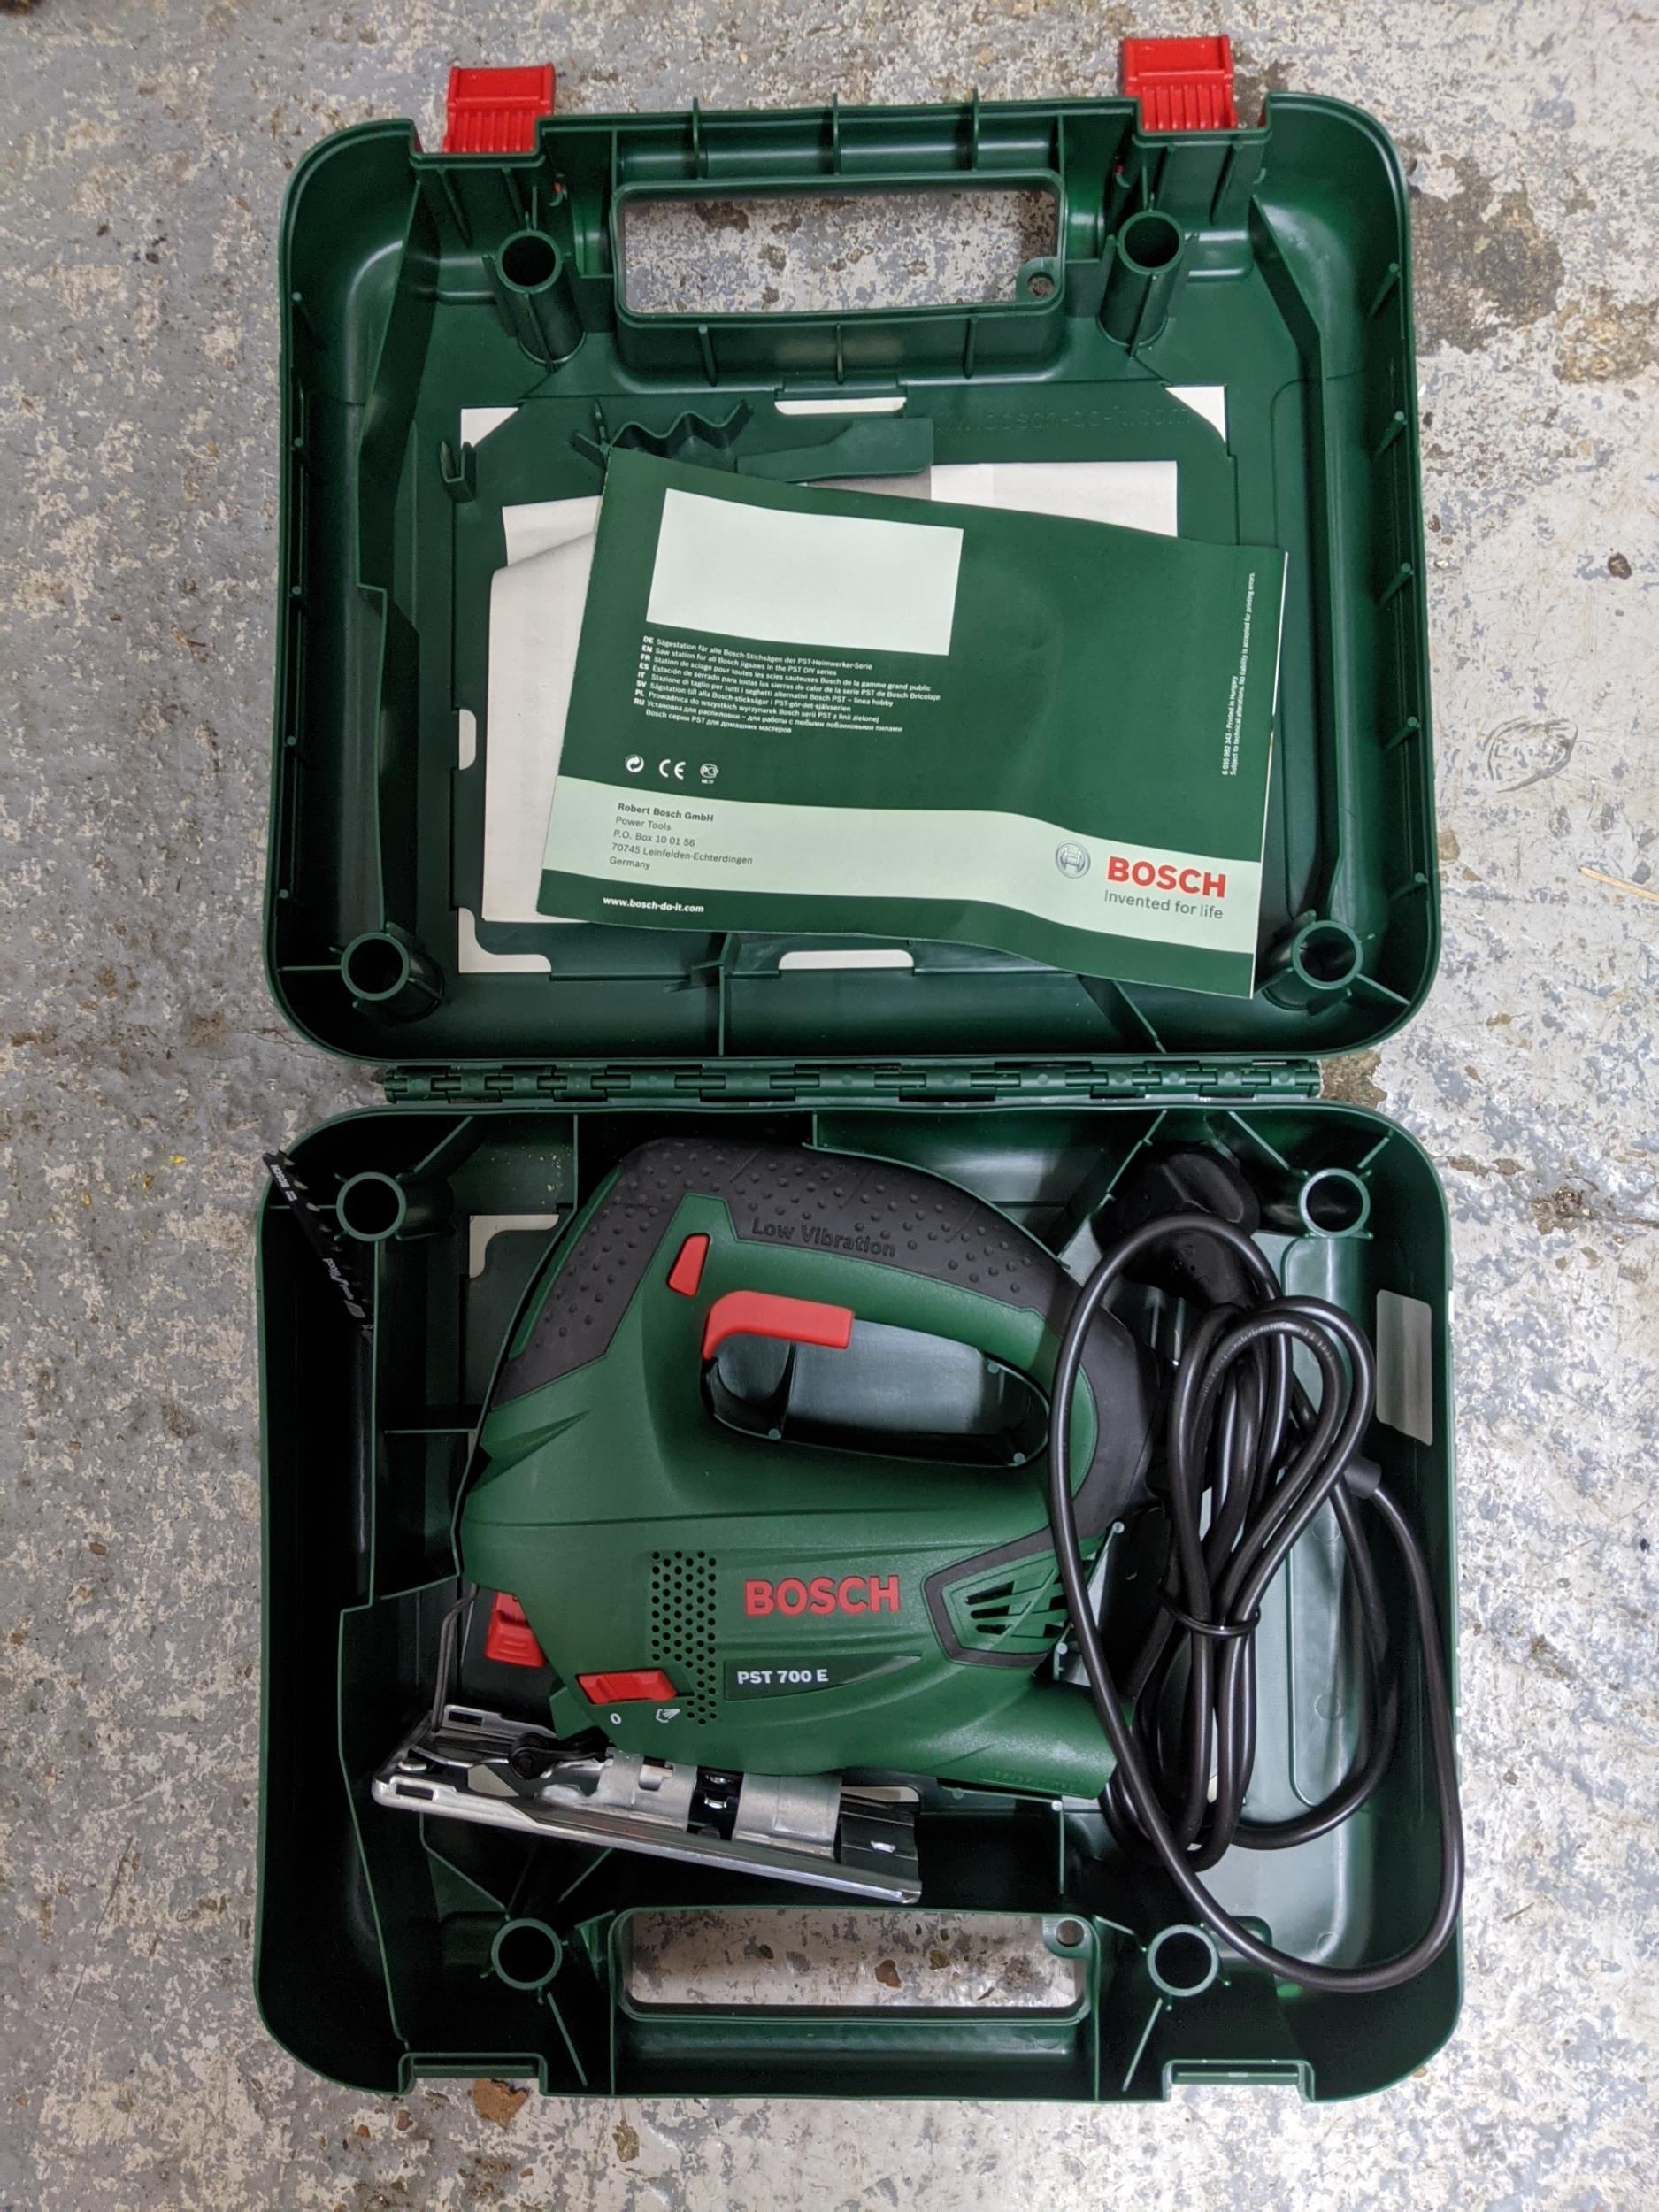 Bosch power tools to include a PST 700E 500w Jigsaw, 500w Planer, 18v Lithium-Lon Hammer drill - Image 3 of 4